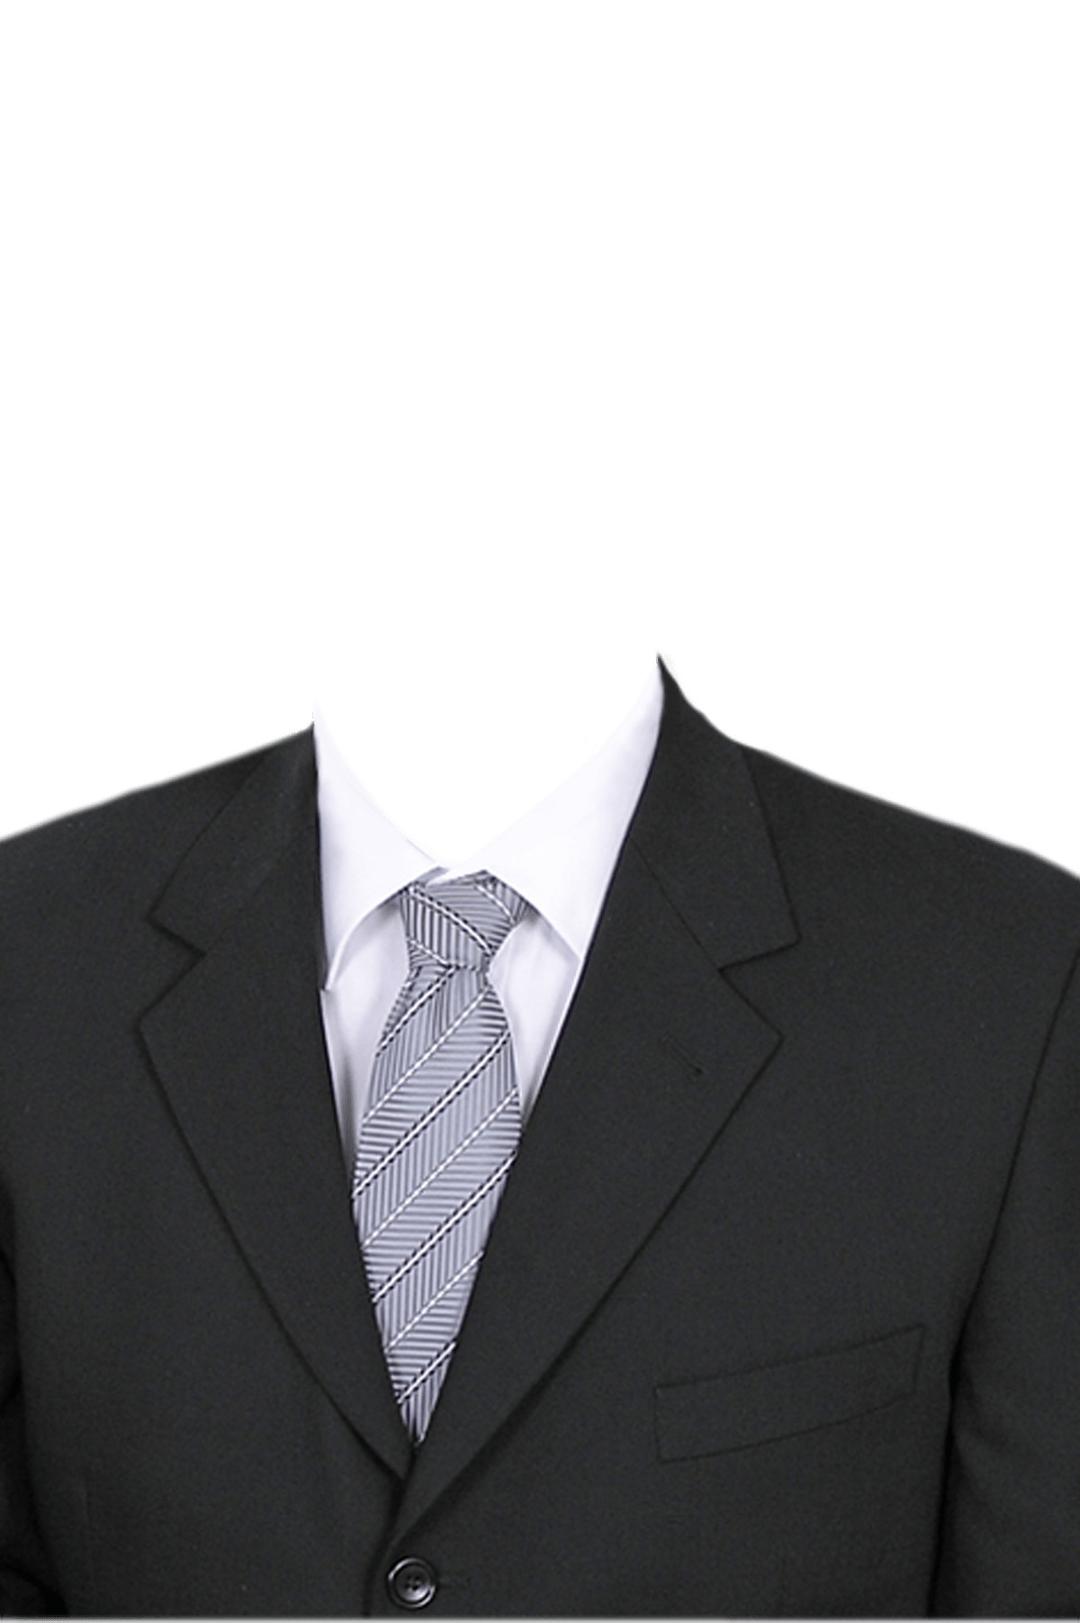 Man In A Suit Template png transparent